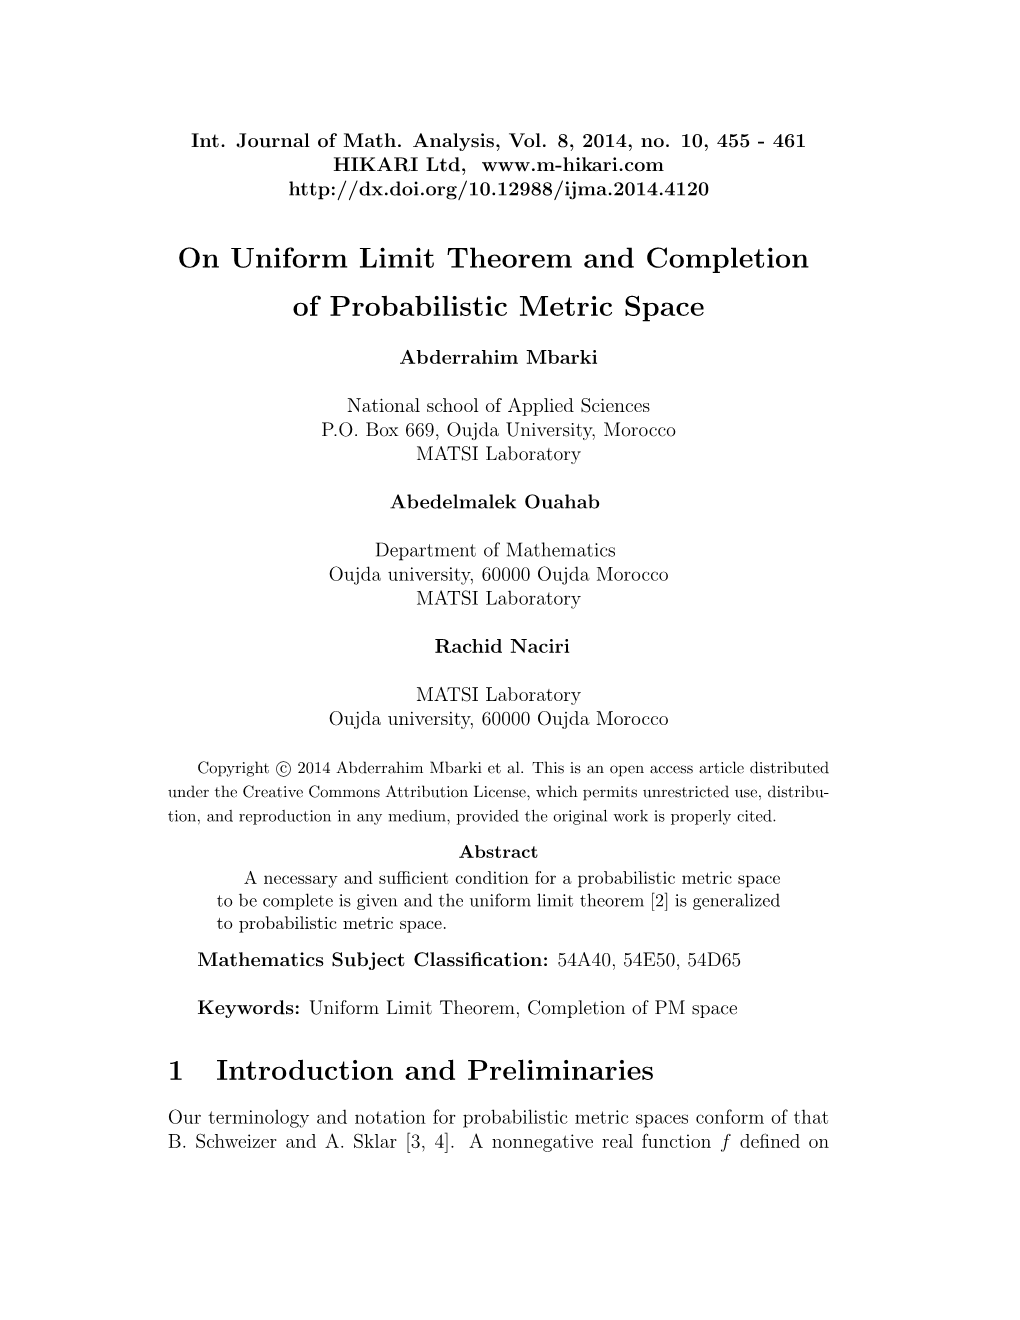 On Uniform Limit Theorem and Completion of Probabilistic Metric Space